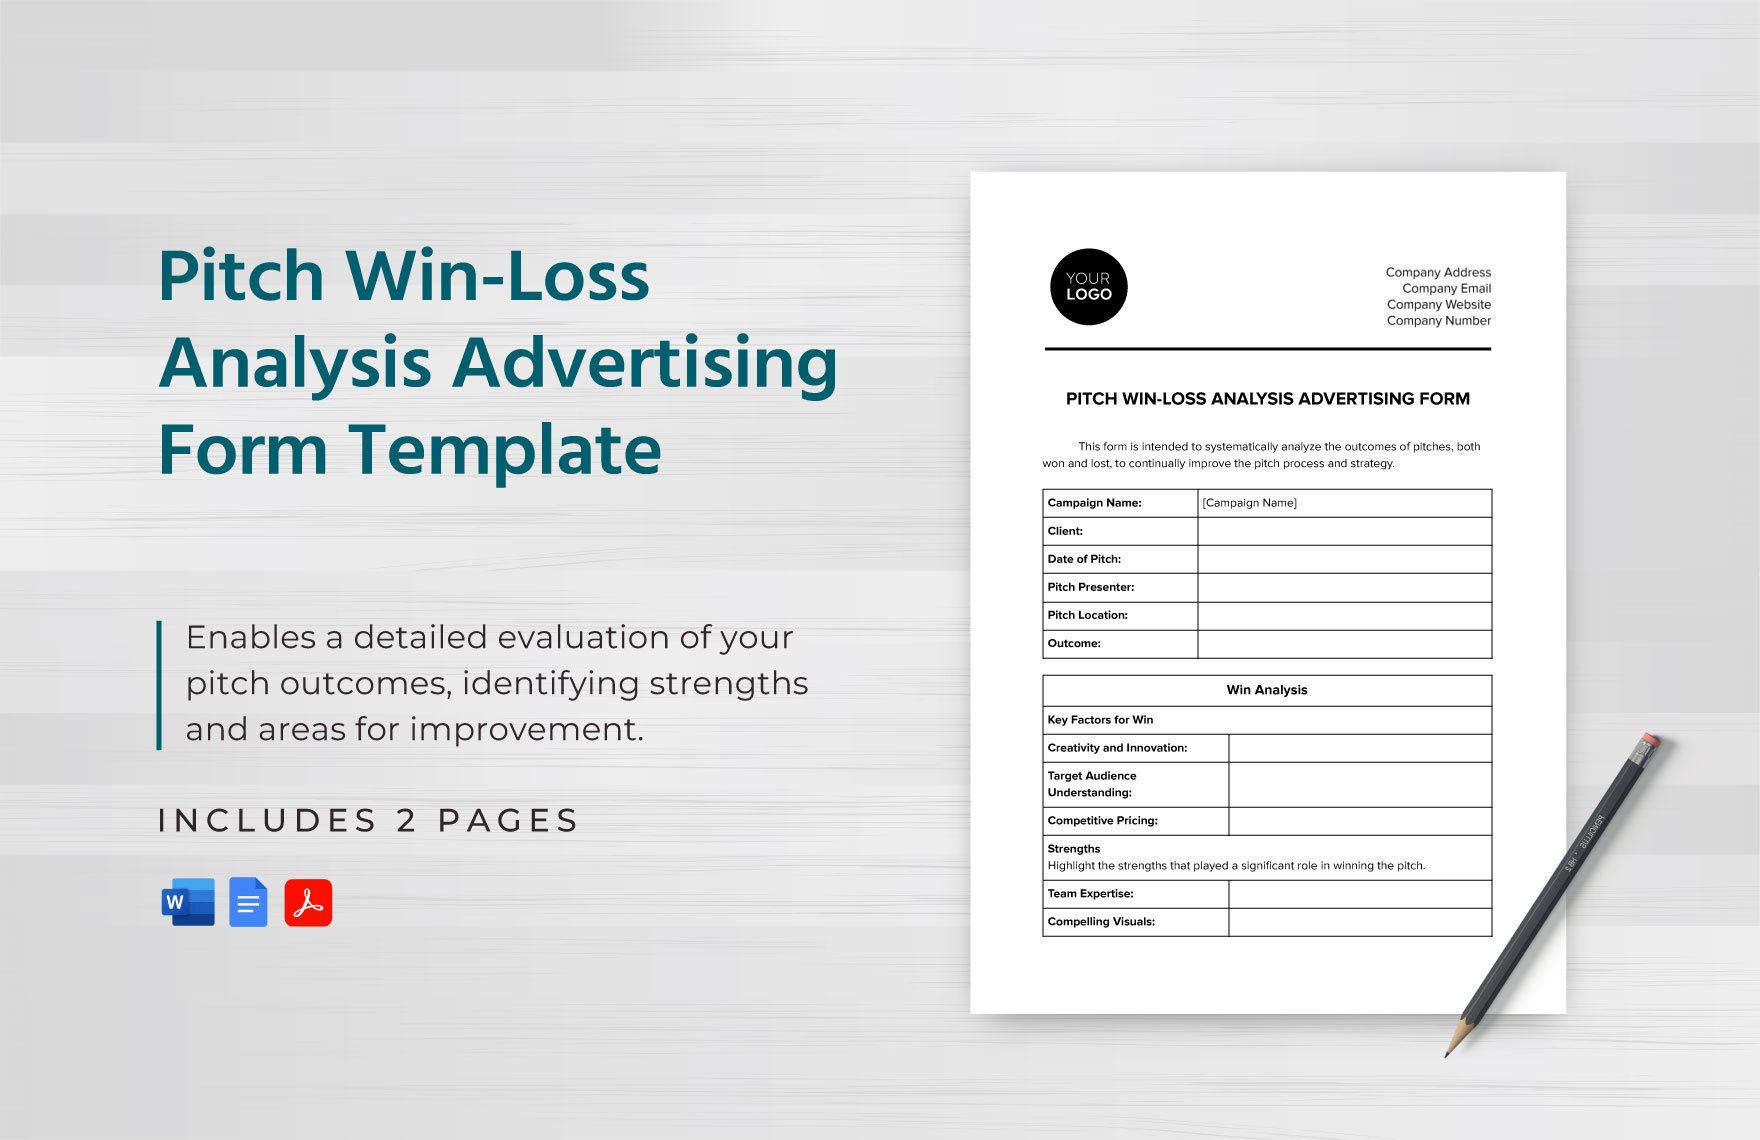 Pitch Win-Loss Analysis Advertising Form Template